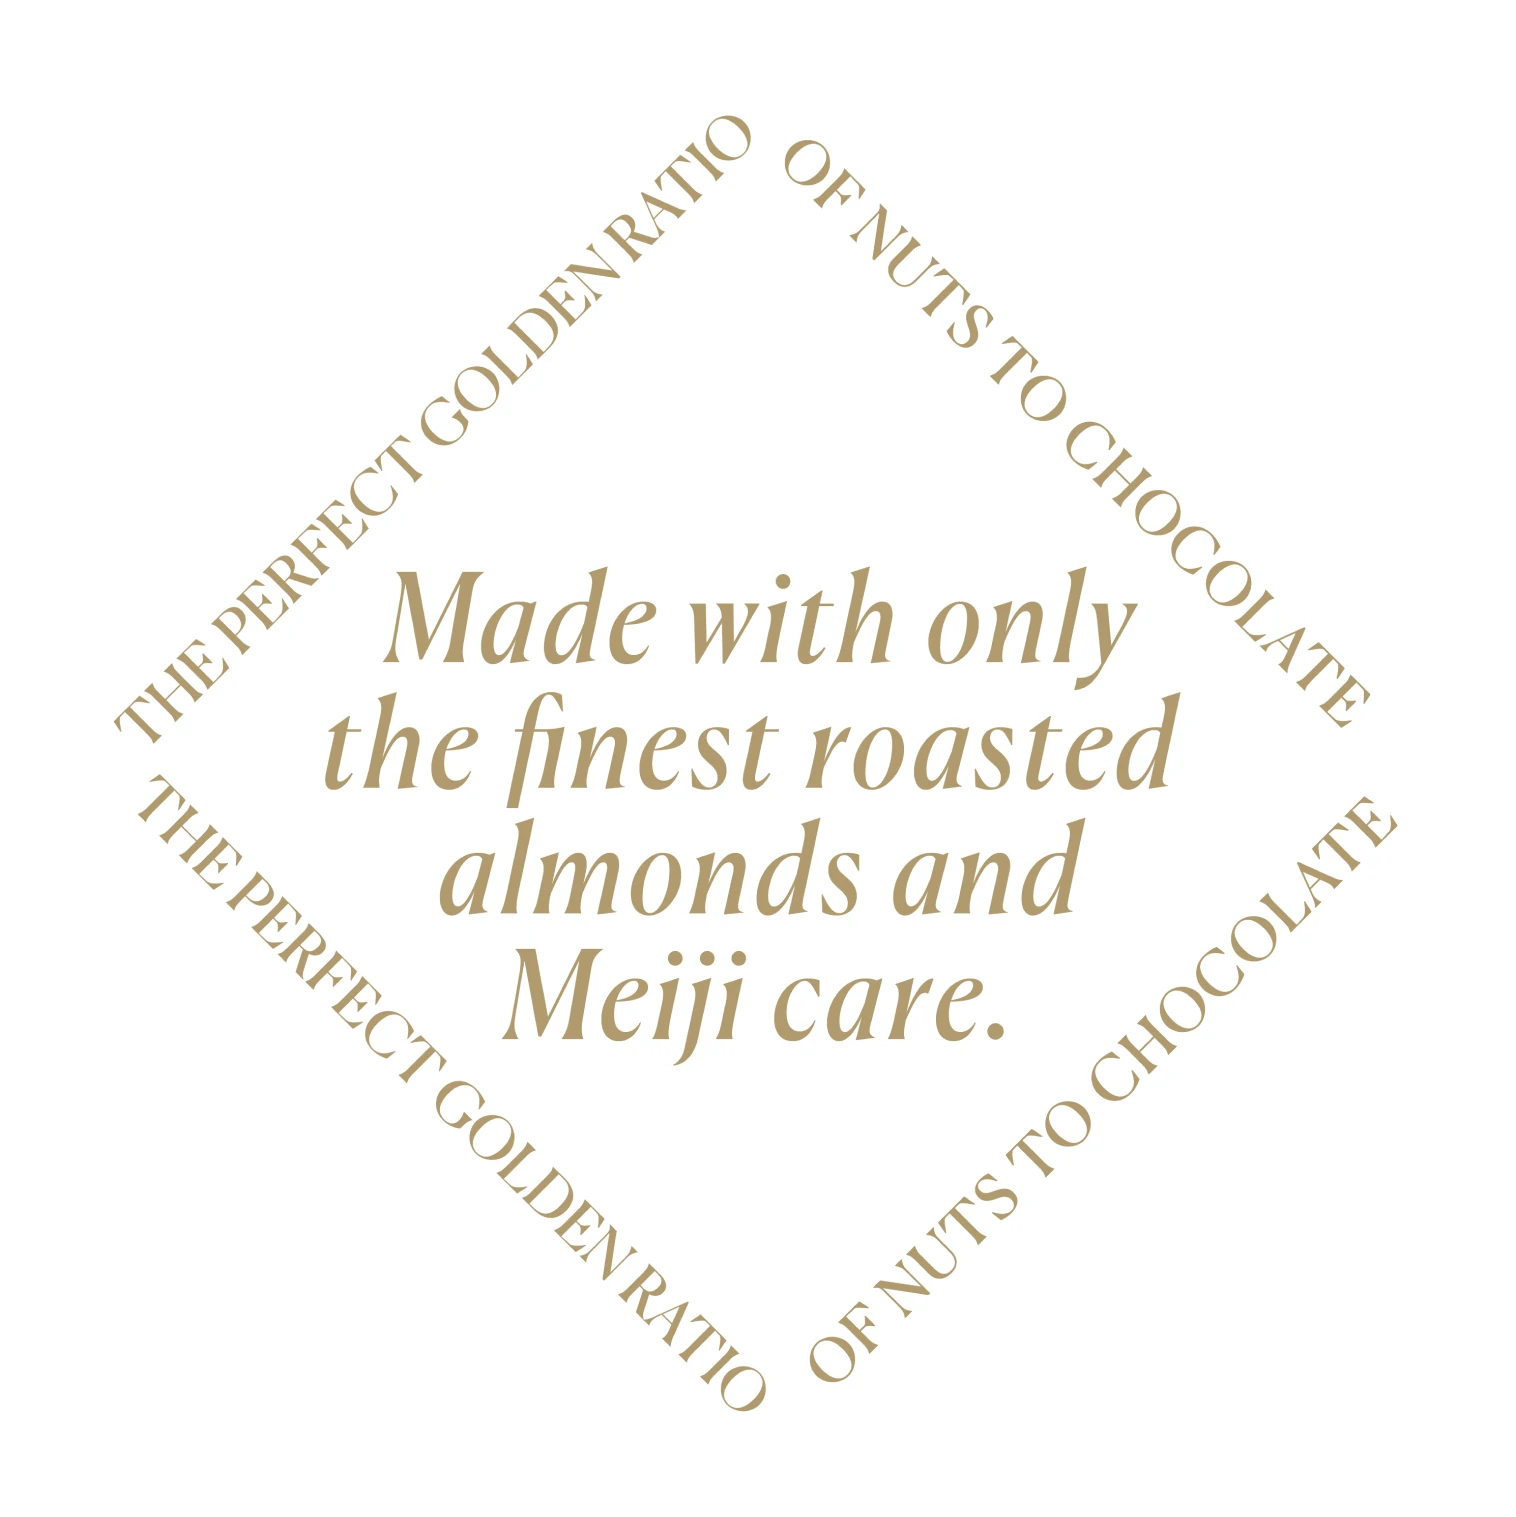 Made with only the finest roasted almonds and Meiji care.